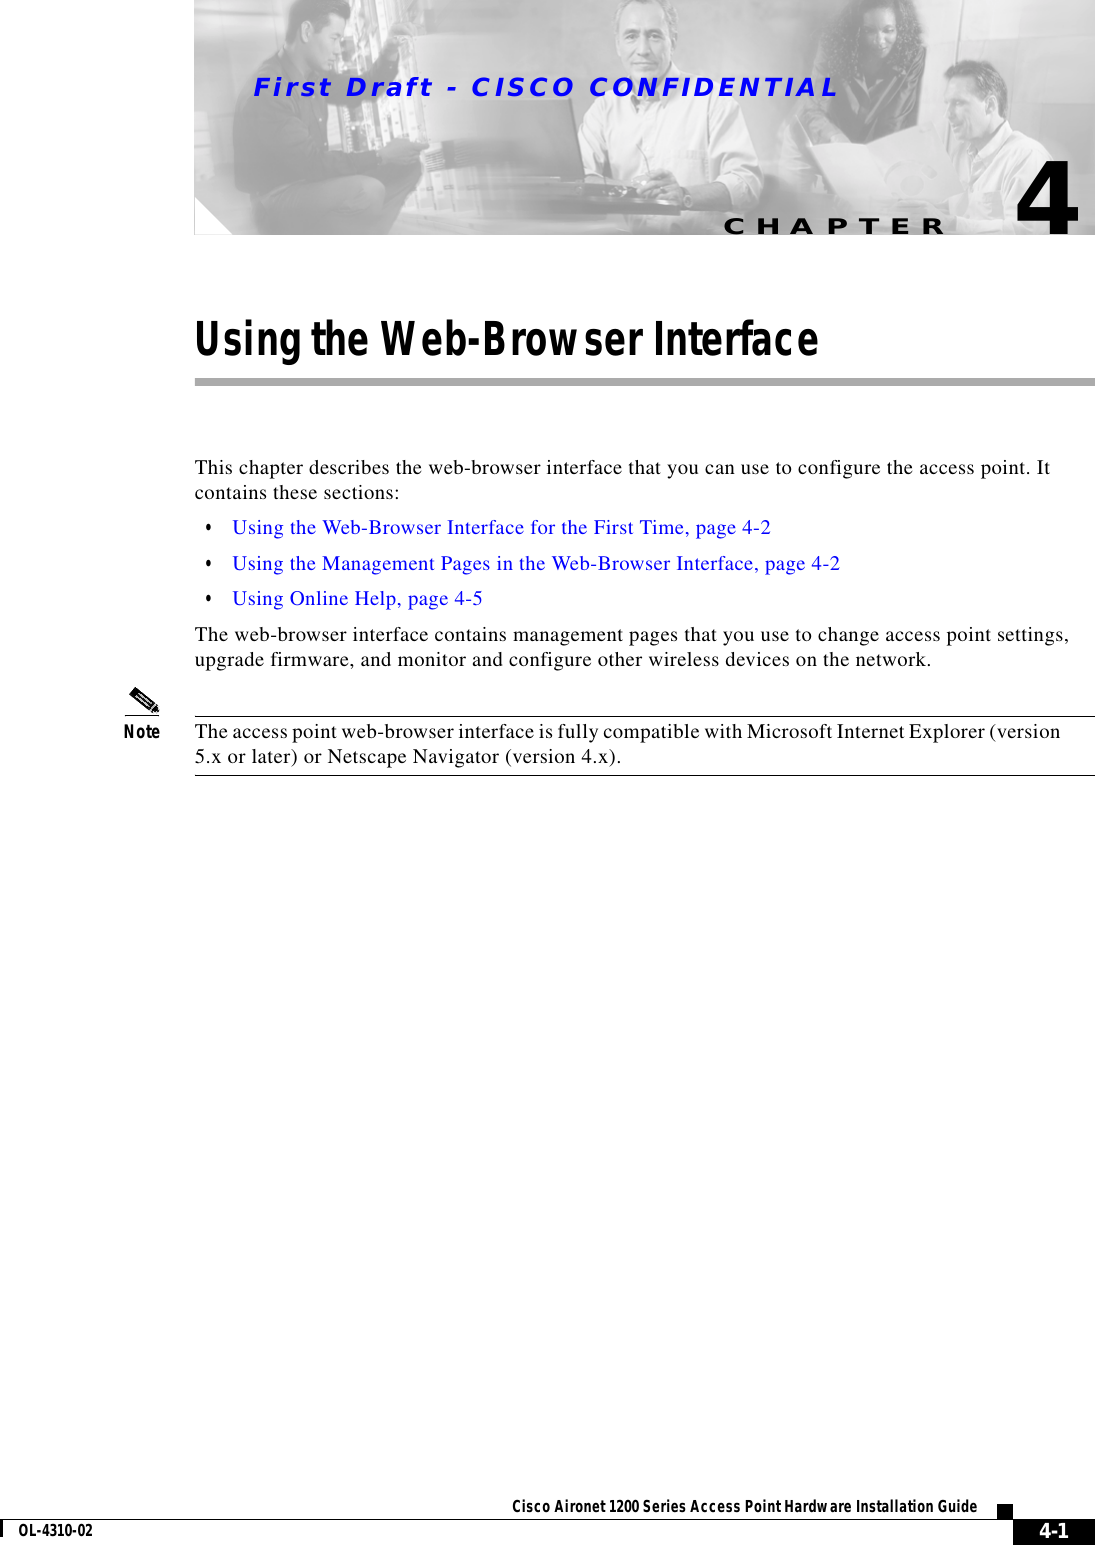 CHAPTERFirst Draft - CISCO CONFIDENTIAL4-1Cisco Aironet 1200 Series Access Point Hardware Installation GuideOL-4310-024Using the Web-Browser InterfaceThis chapter describes the web-browser interface that you can use to configure the access point. It contains these sections:•Using the Web-Browser Interface for the First Time, page 4-2•Using the Management Pages in the Web-Browser Interface, page 4-2•Using Online Help, page 4-5The web-browser interface contains management pages that you use to change access point settings, upgrade firmware, and monitor and configure other wireless devices on the network.Note The access point web-browser interface is fully compatible with Microsoft Internet Explorer (version 5.x or later) or Netscape Navigator (version 4.x).